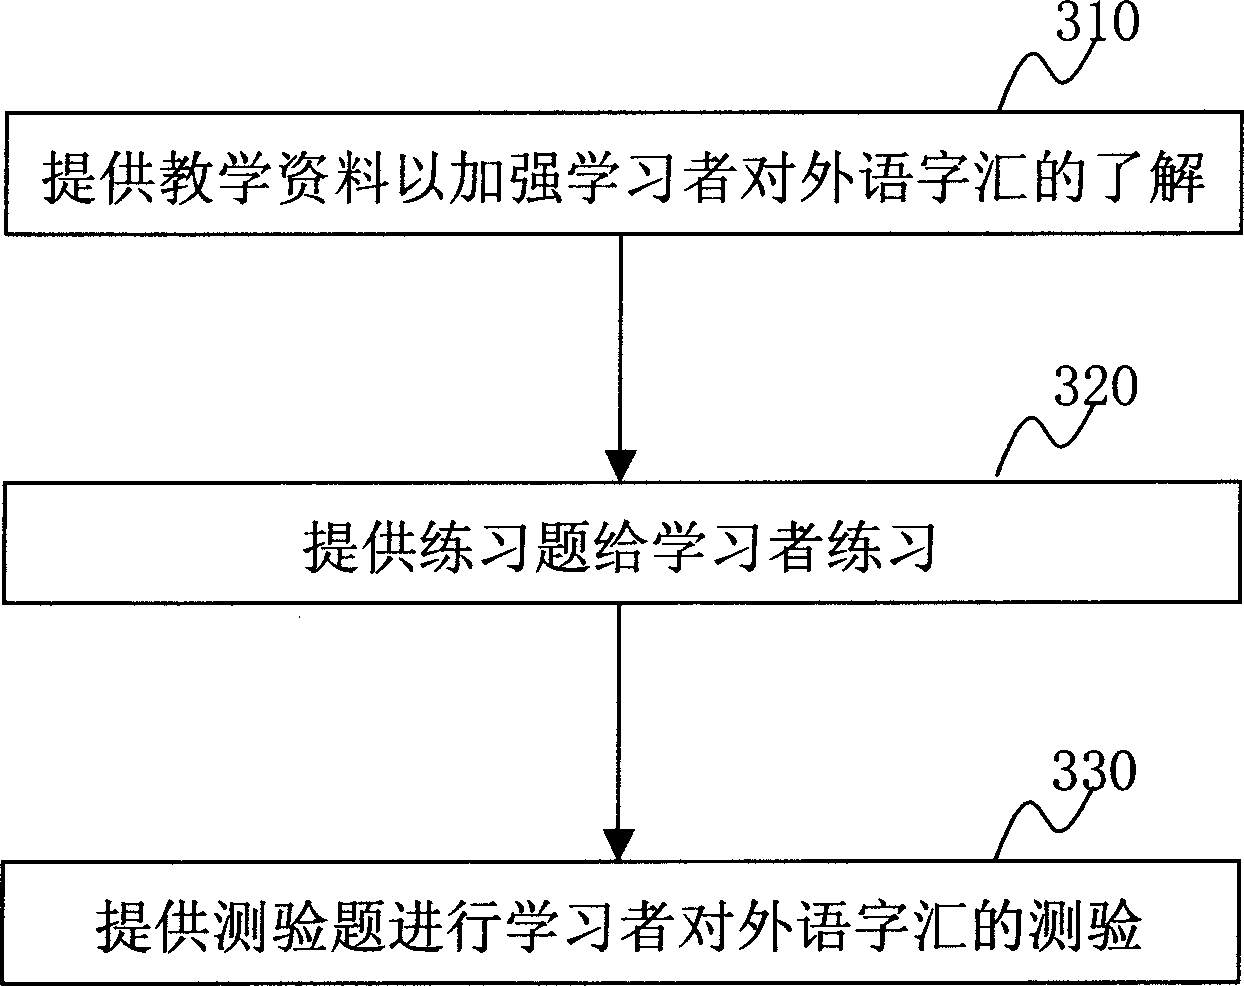 Method for guiding to learn foreign language words